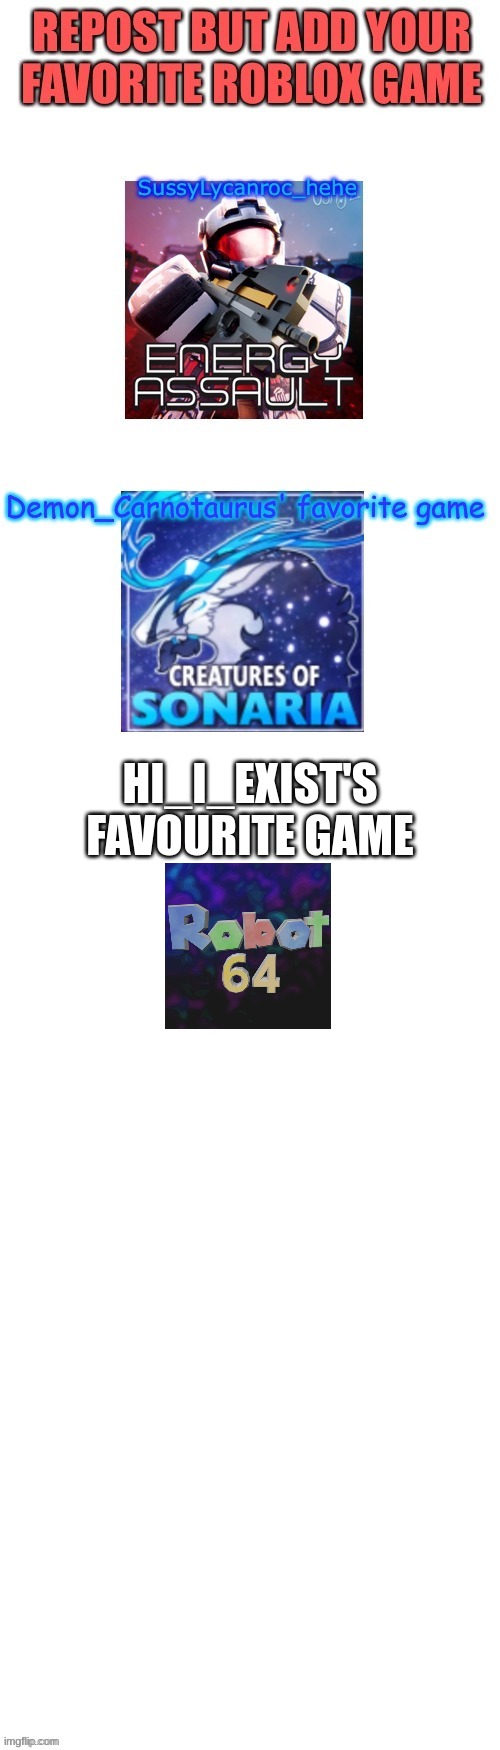 HI_I_EXIST'S FAVOURITE GAME | image tagged in roblox | made w/ Imgflip meme maker